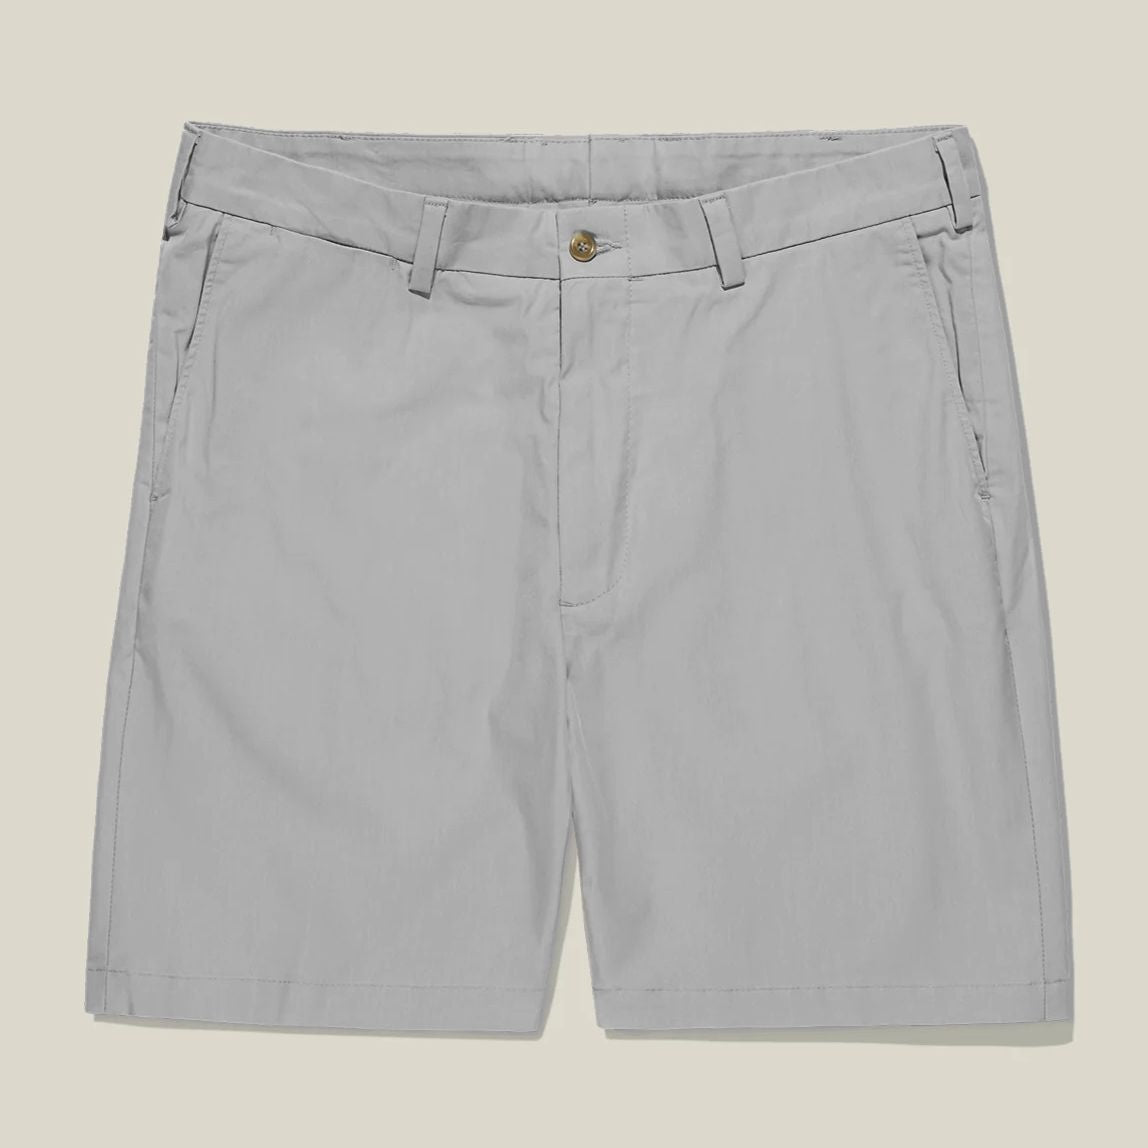 M3 Straight Fit Travel Twill Shorts in Nickel (Size 38) by Bills Khakis